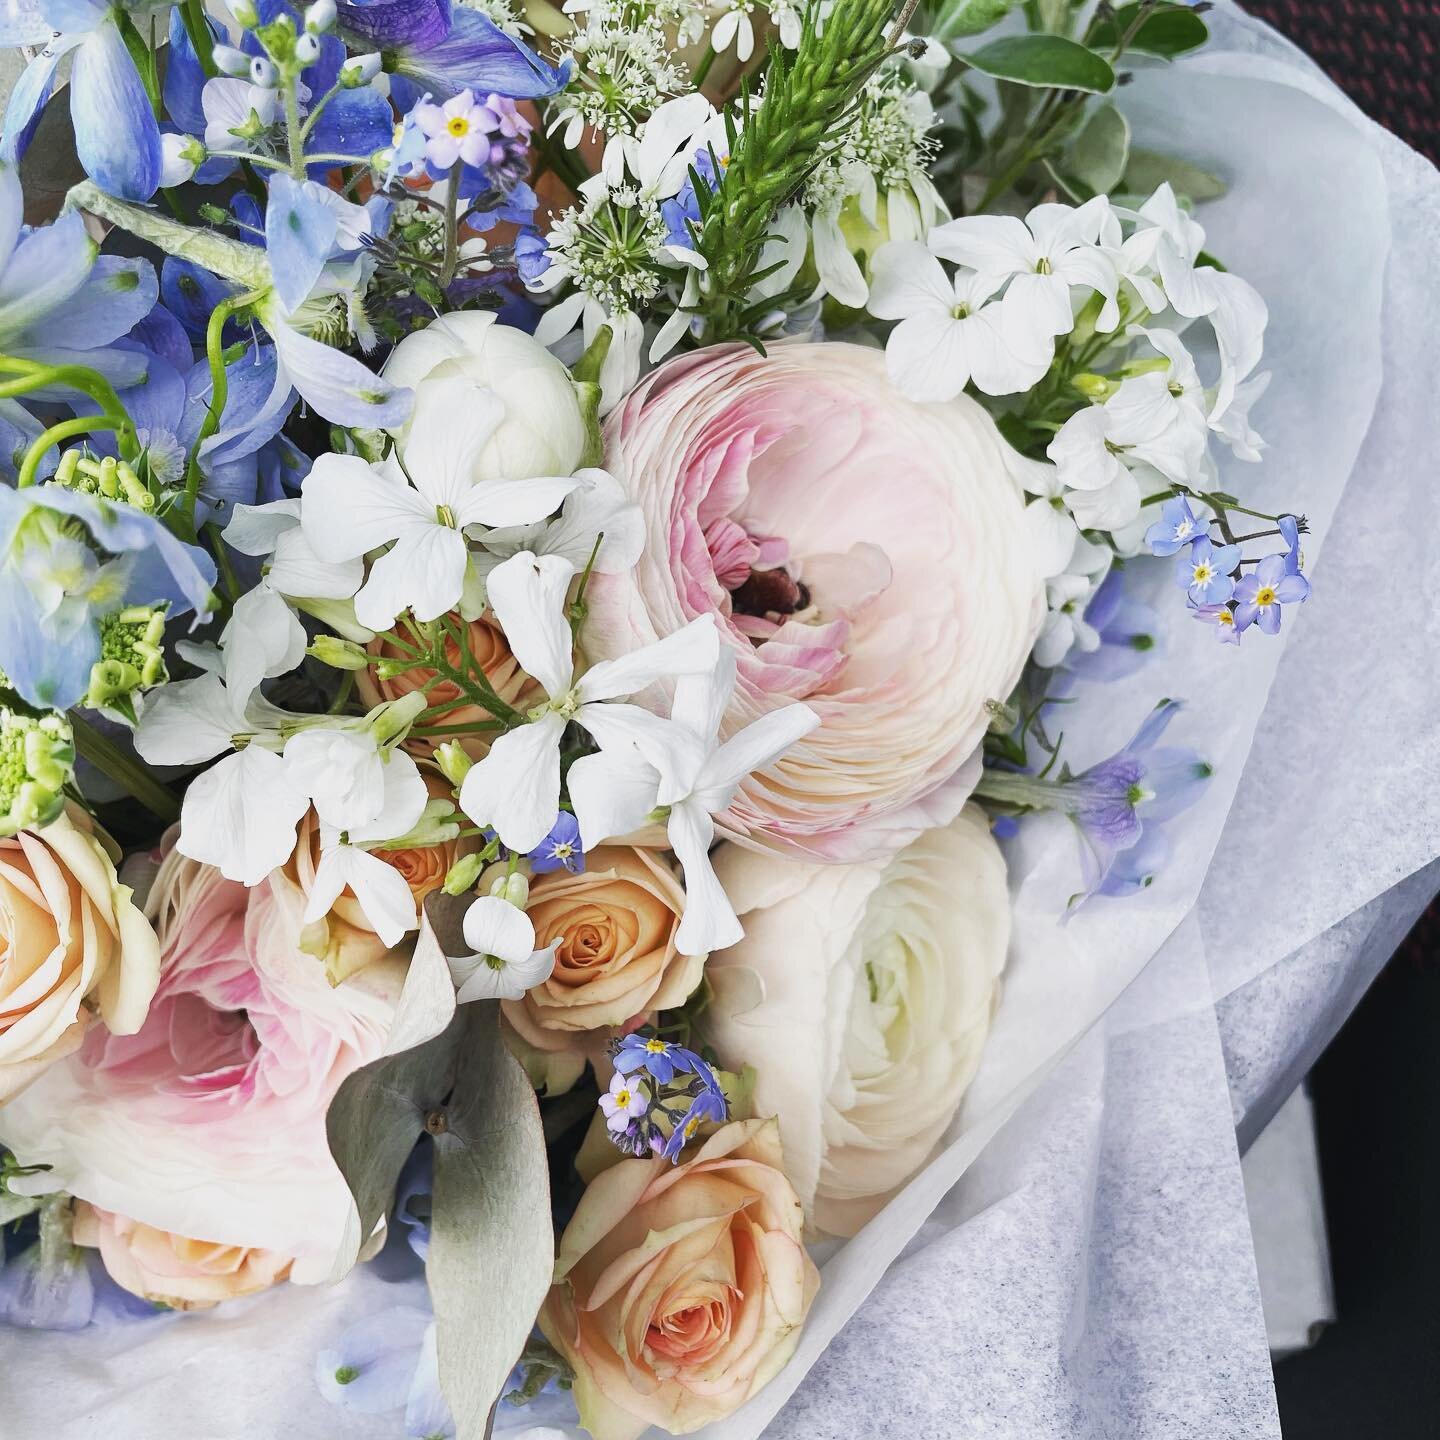 Did you know that you can order just your bridal party flowers from me? If you simply need bouquets and buttonholes and nothing more for your big day, I provide this service so let&rsquo;s talk!

Pictured is a bridal bouquet for Maddie who married Wa